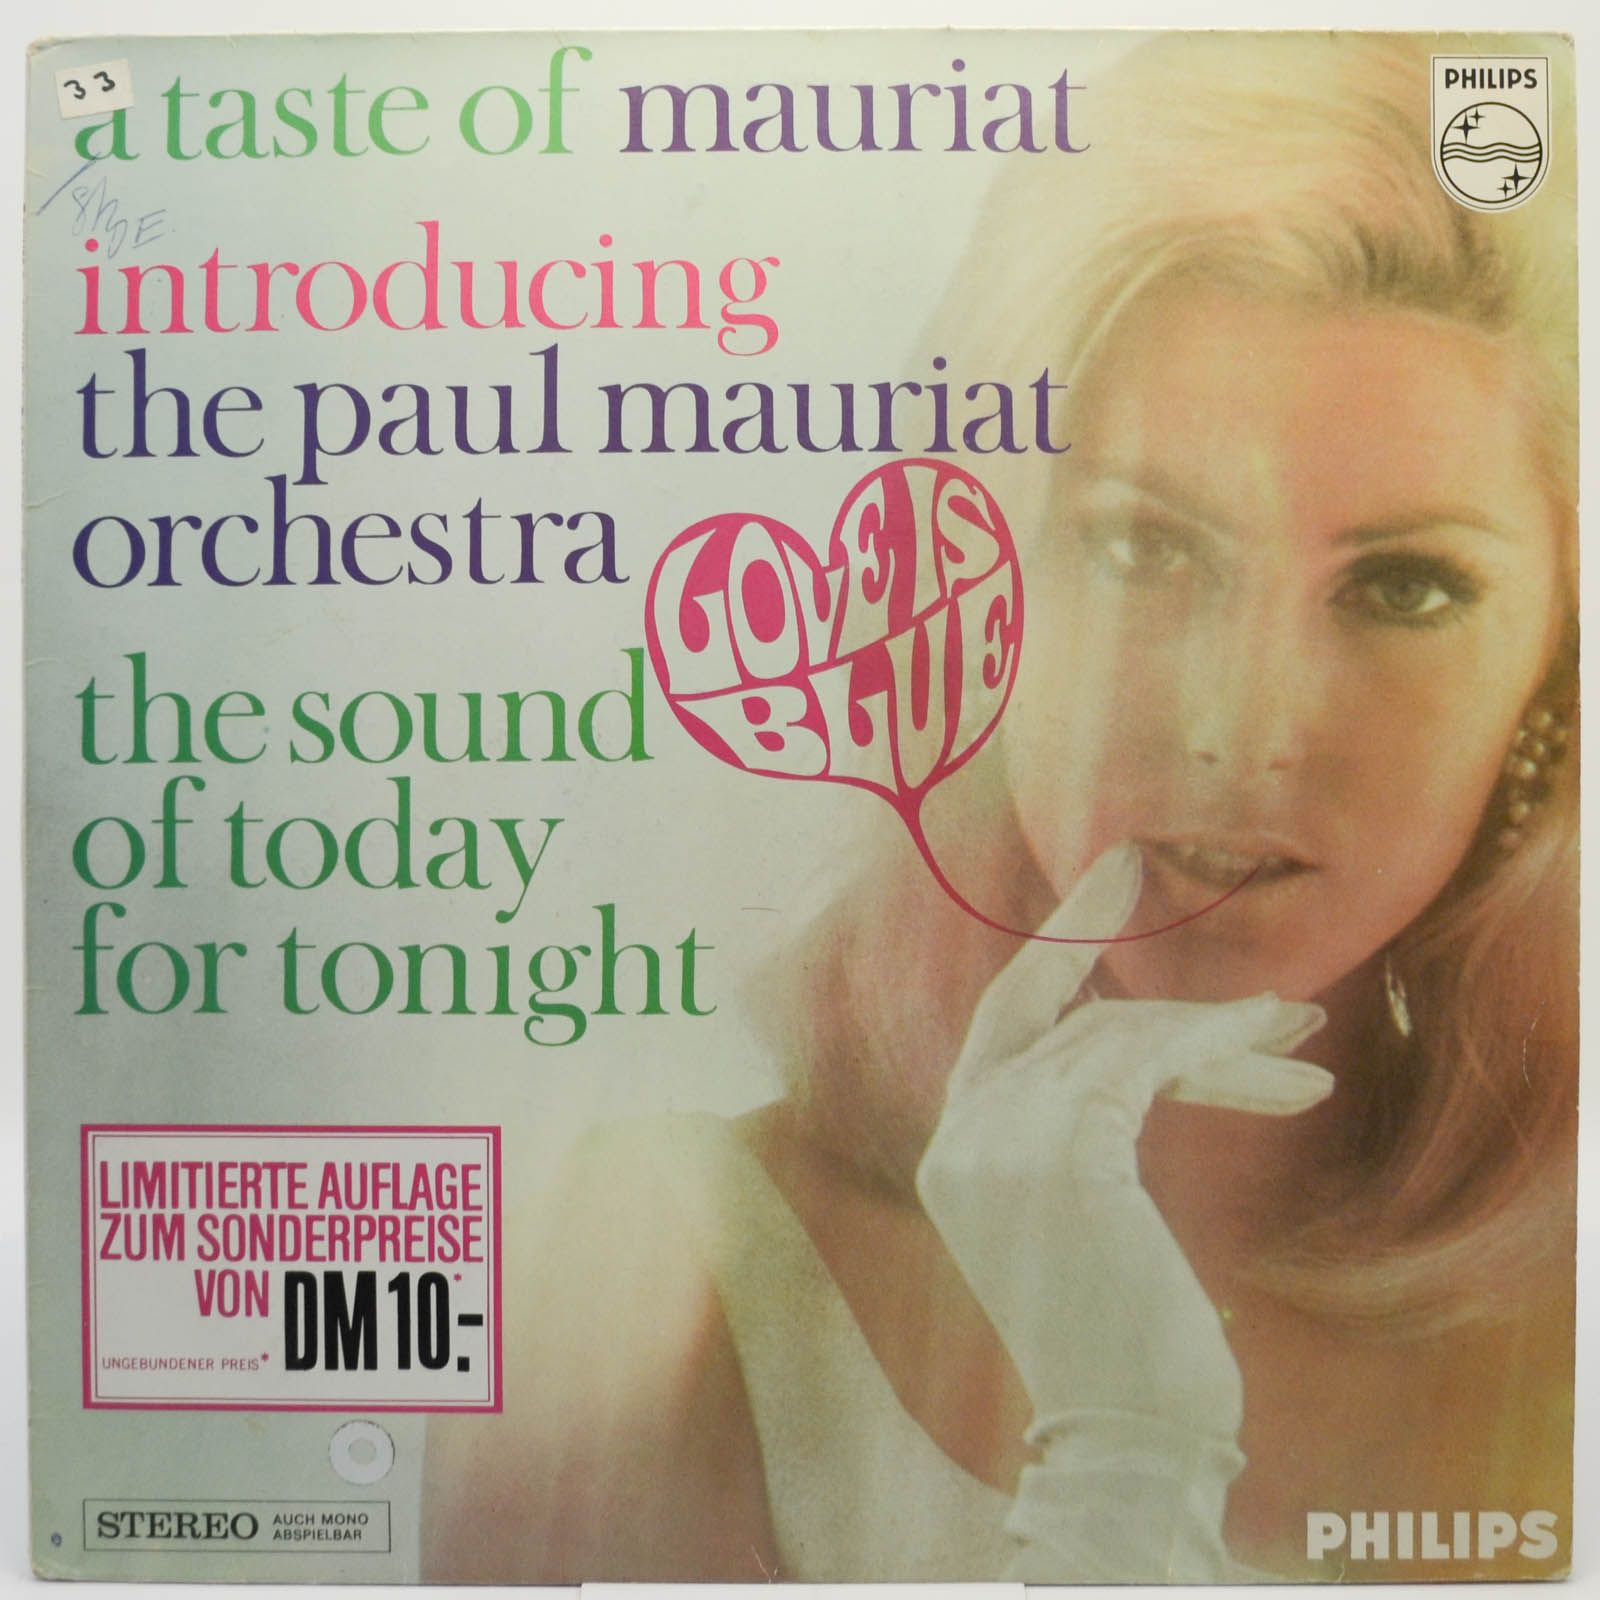 Paul Mauriat And His Orchestra — A Taste Of Mauriat, 1967